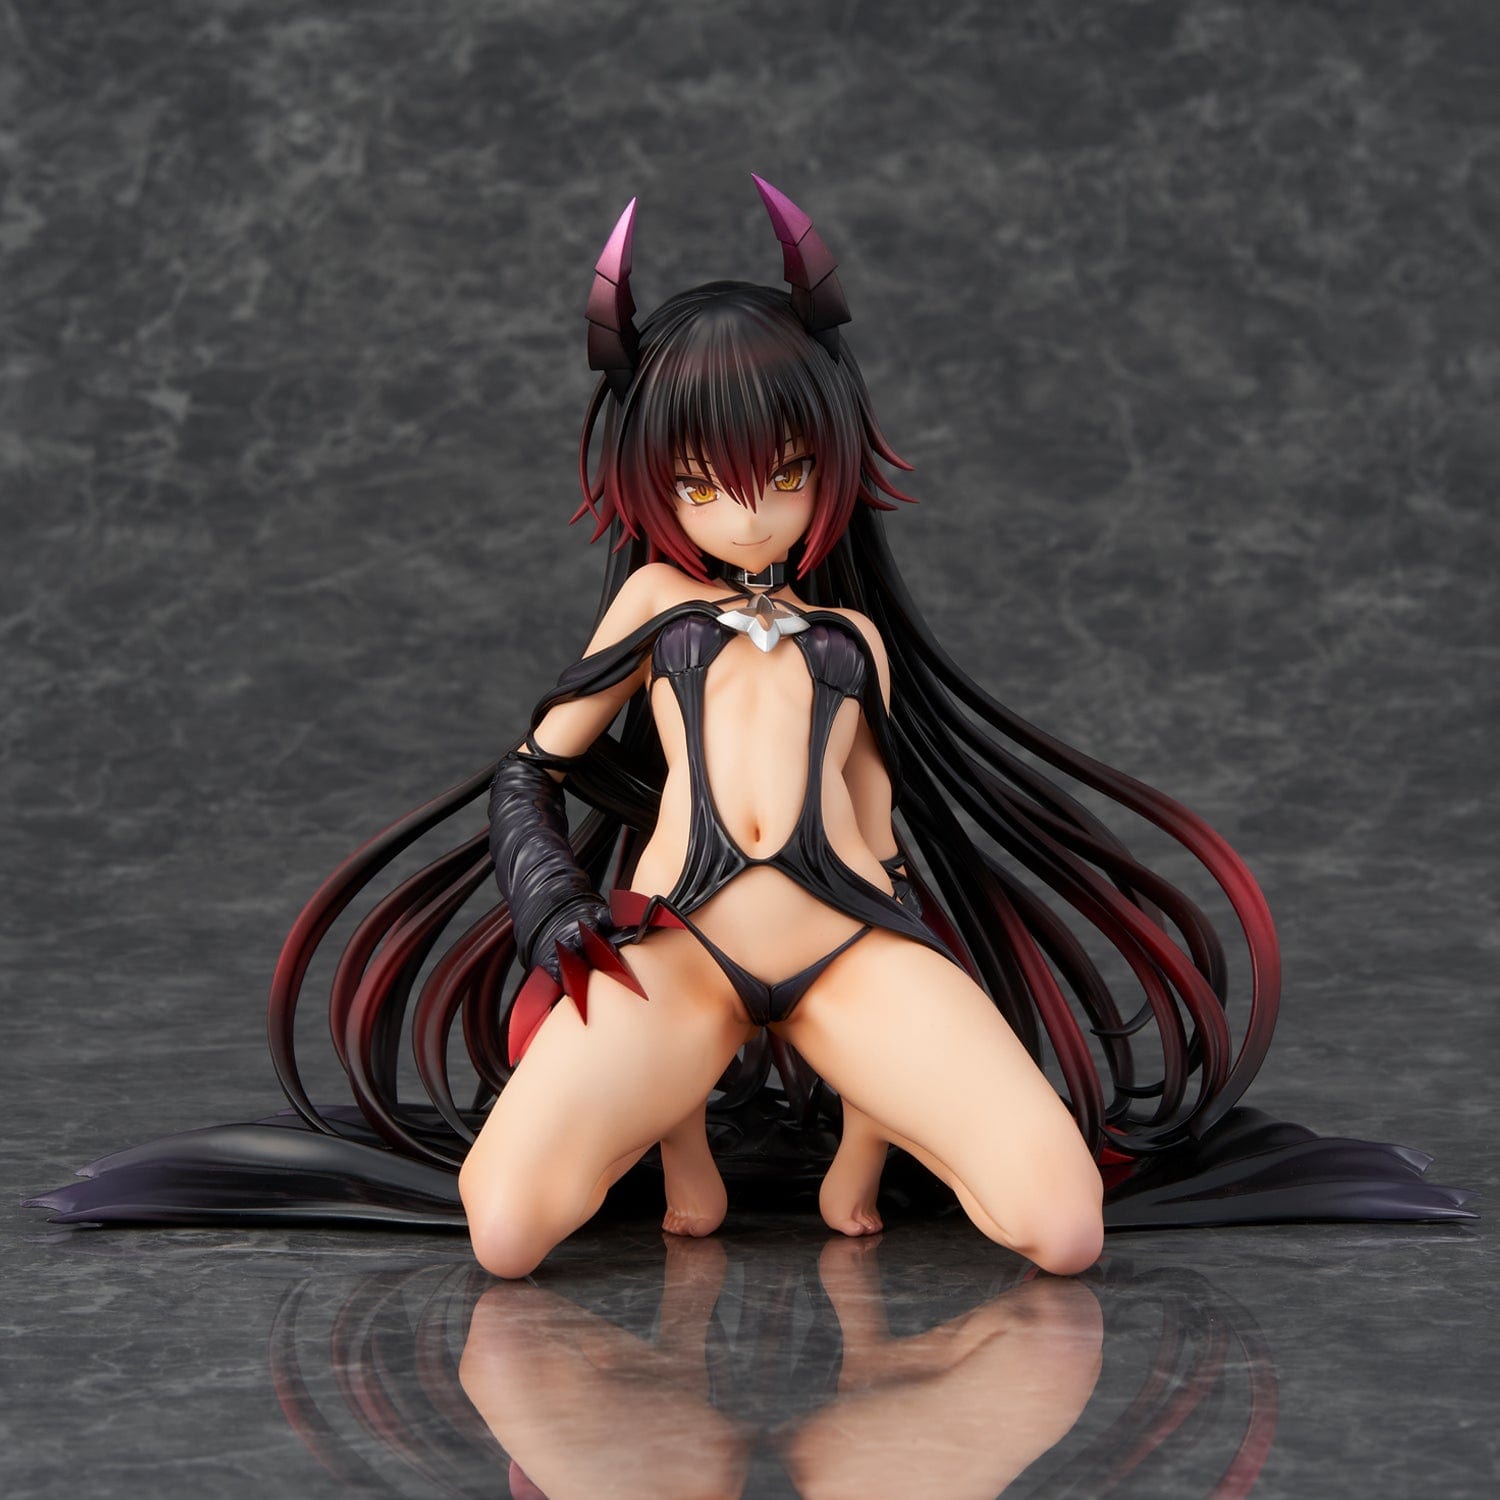 Union Creative To LOVE - Trouble - Darkness - Nemesis Darkness ver. - 1/6th SCALE FIGURE